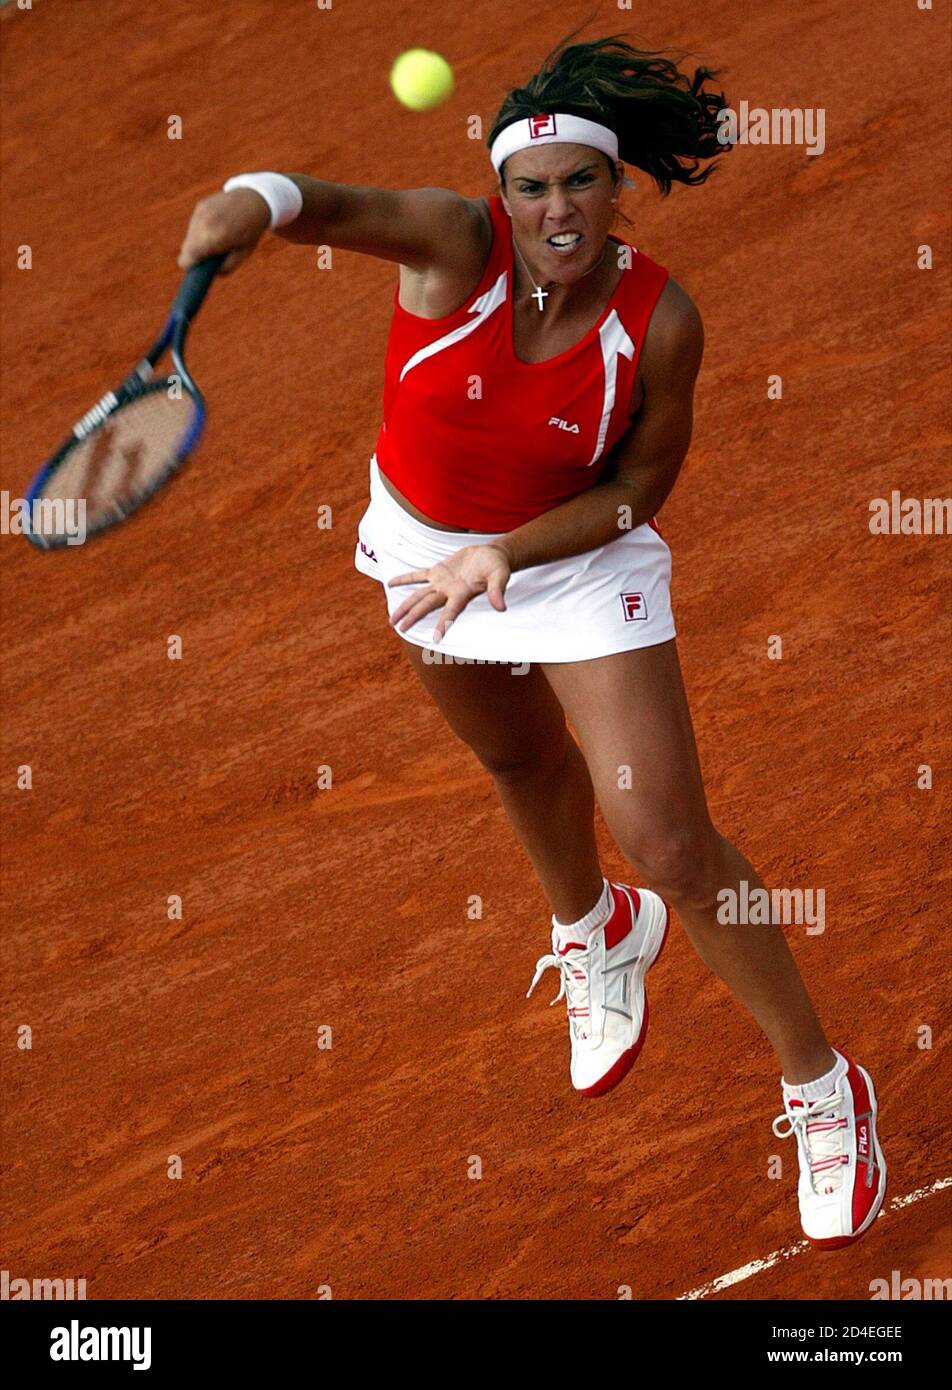 Jennifer Capriati Of The Us Serves During Her Match Against Marion Bartoli Of France In The French Tennis Open Stock Photo Alamy